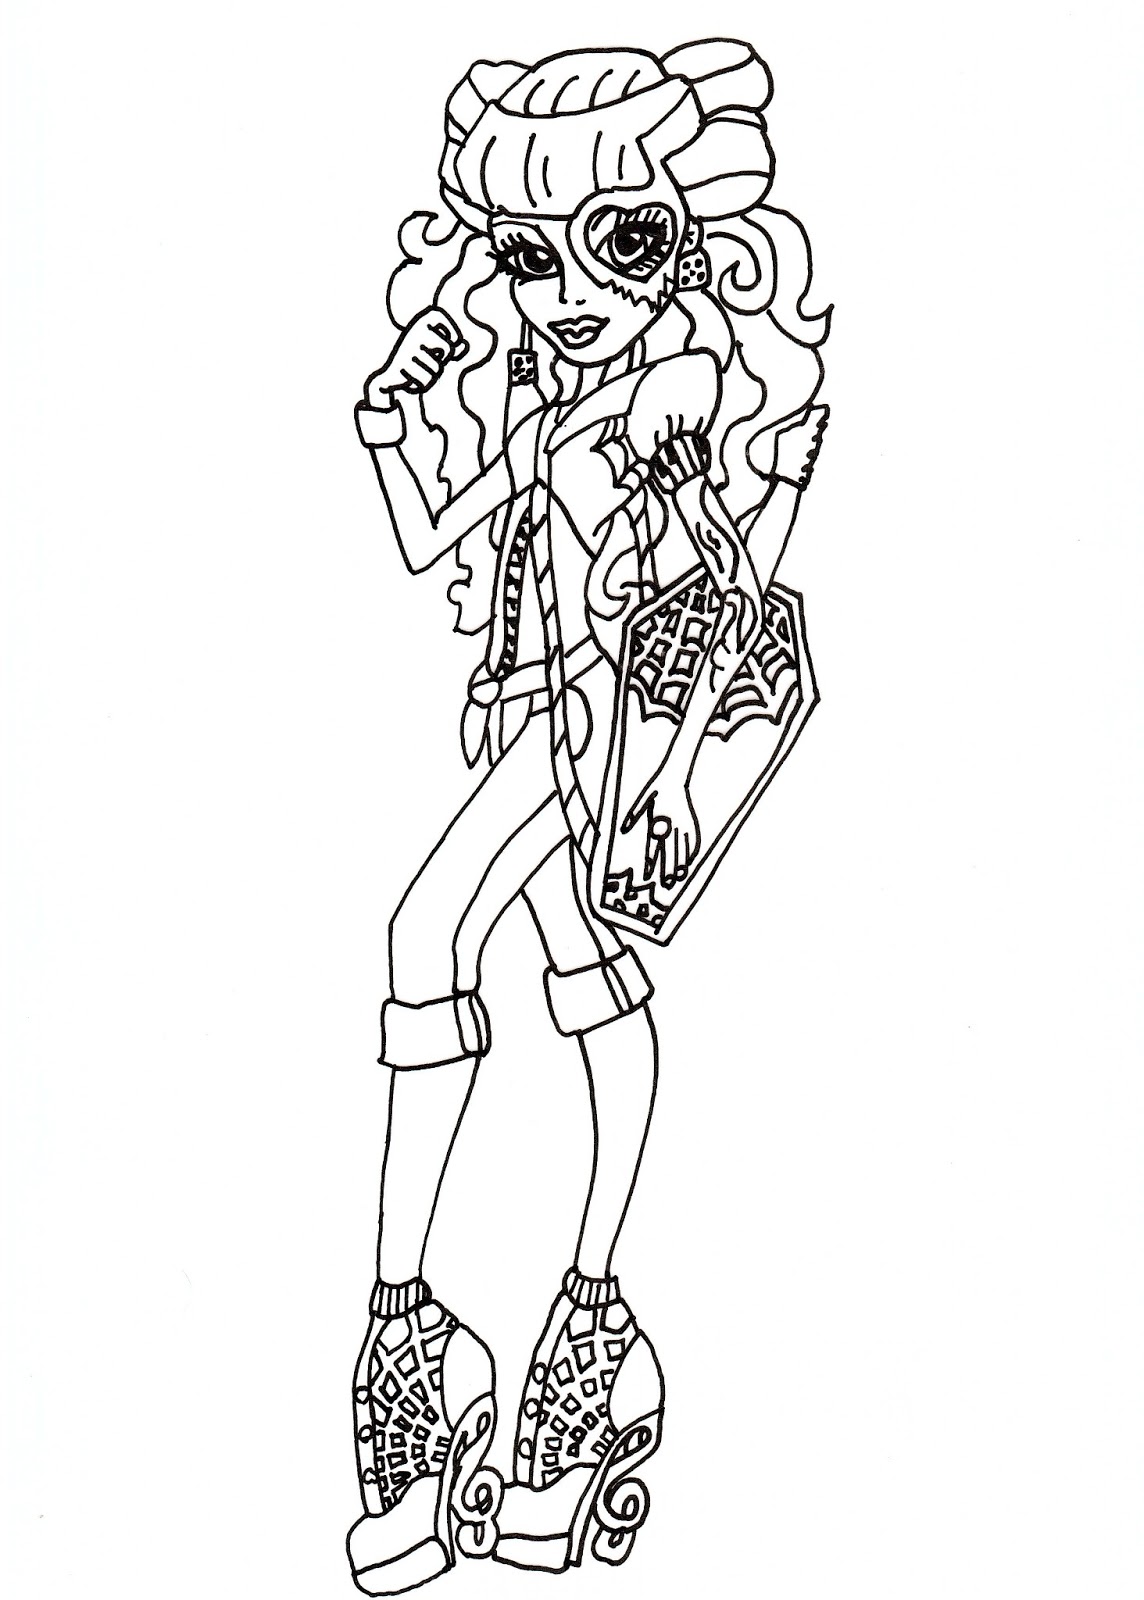 Free Printable Monster High Coloring Pages: Operetta Coloring Sheet